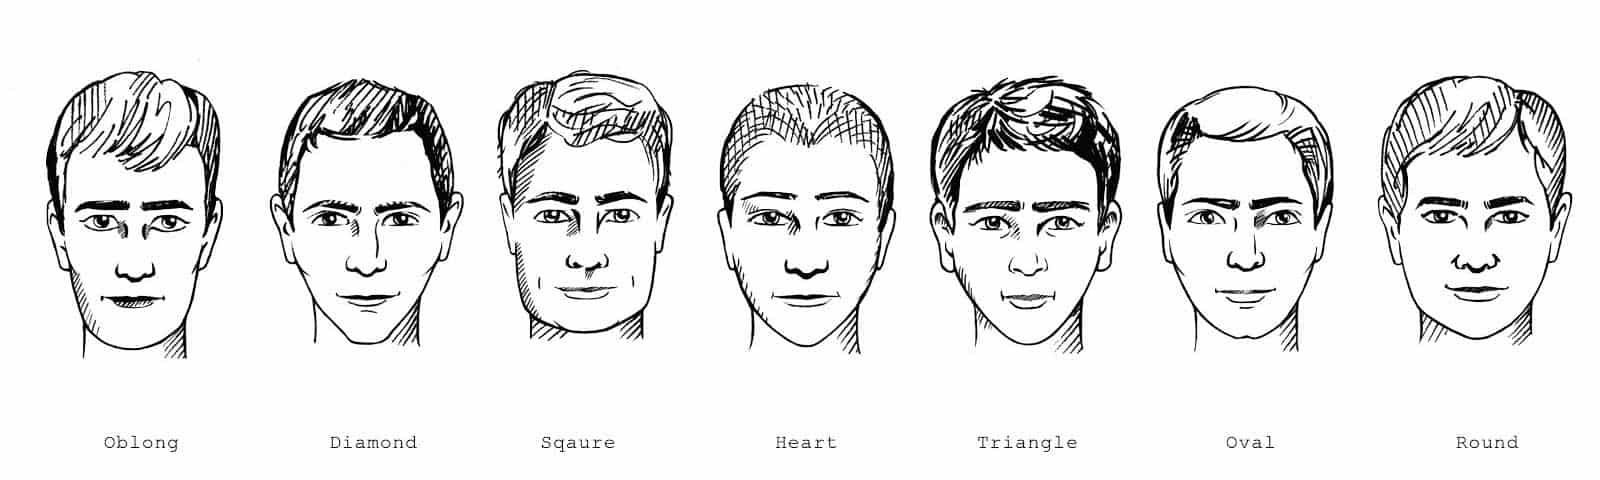 Beard Styles Depending On Your Face Shae